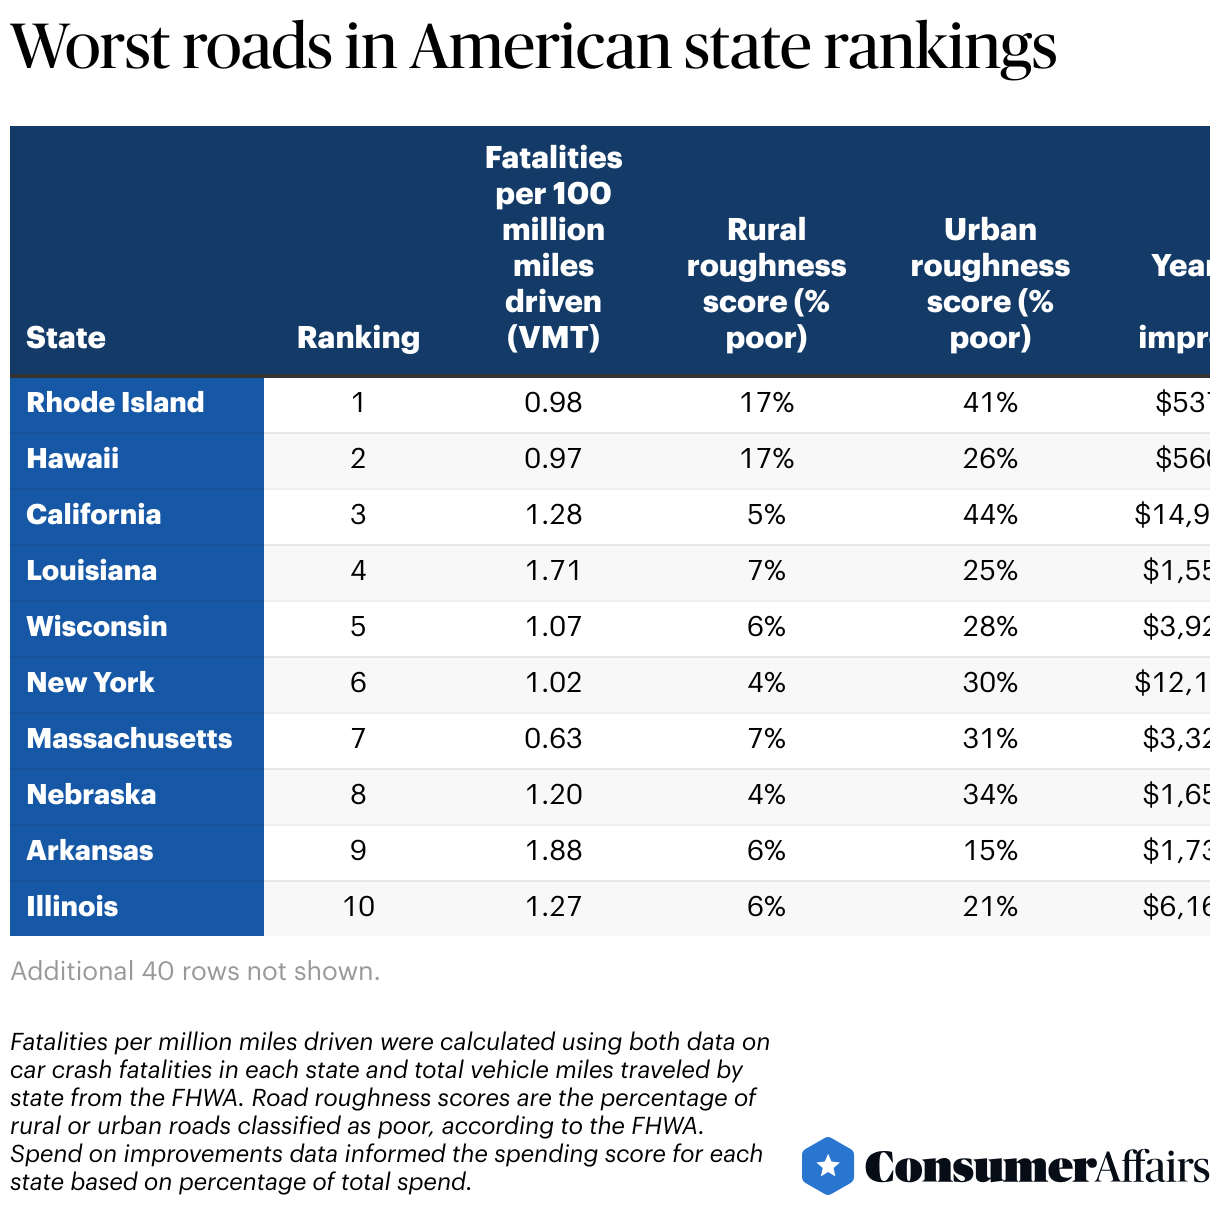 Worst roads in American state rankings